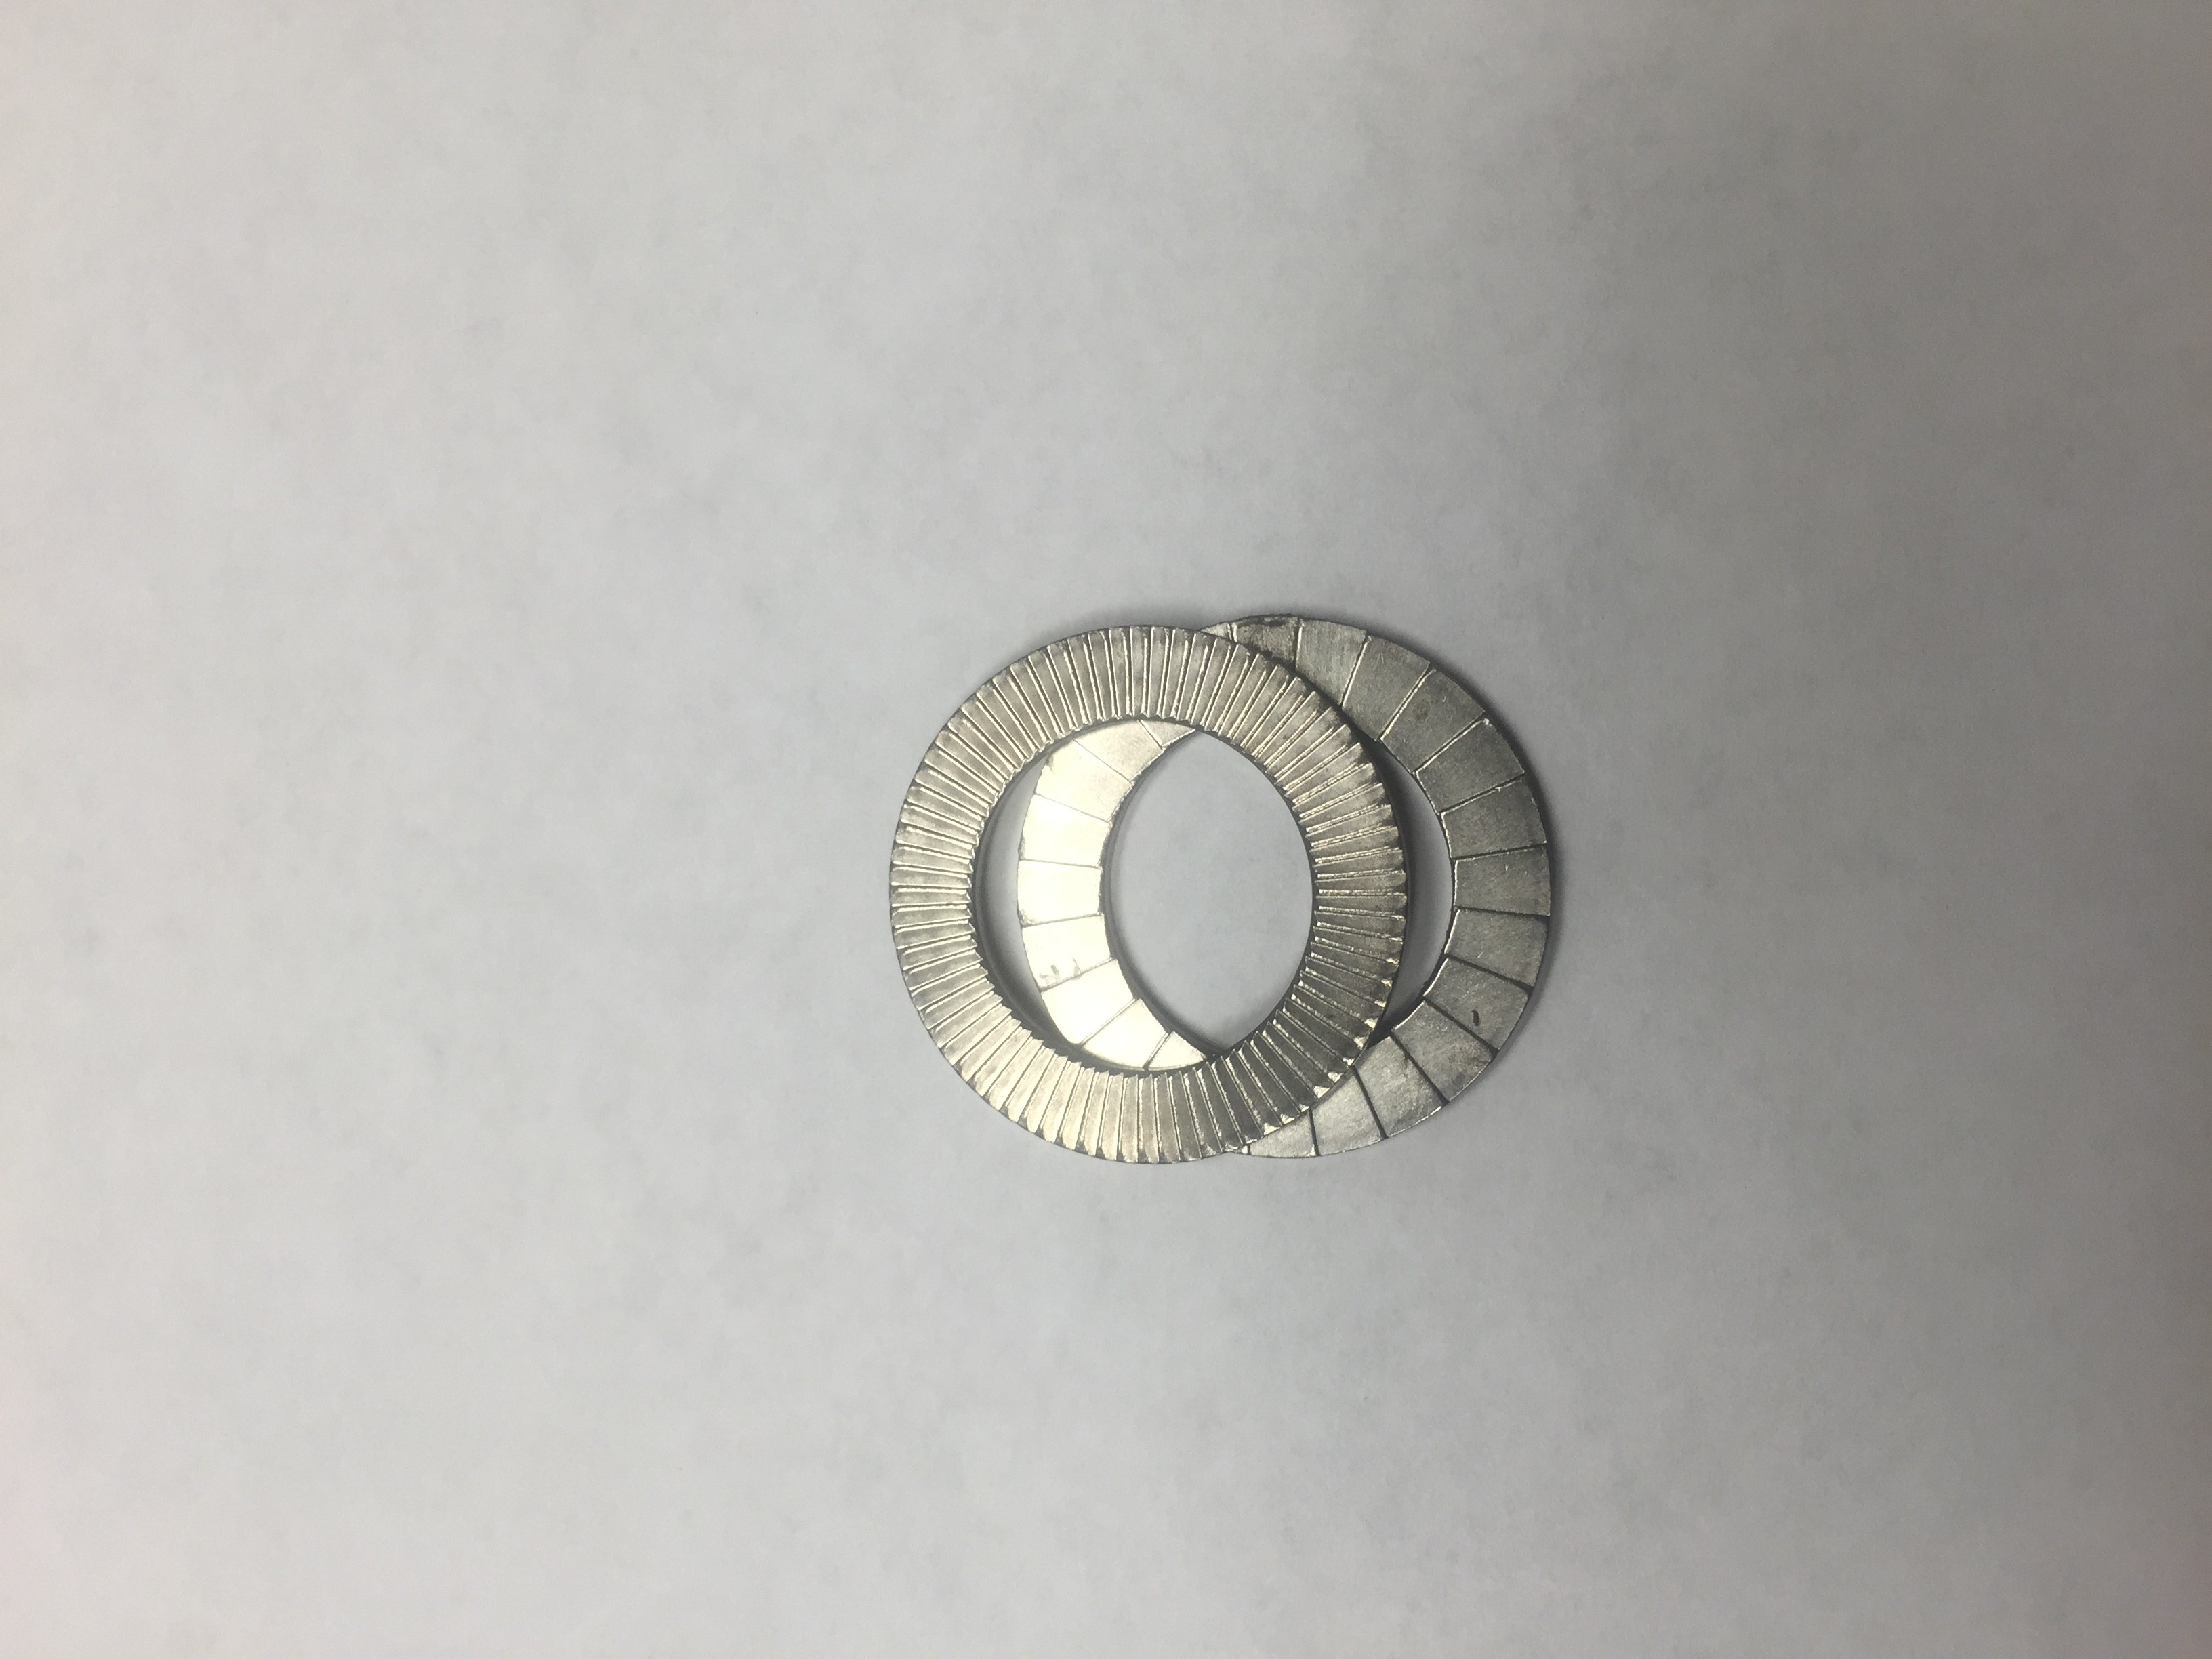 3/8 316 STAINLESS STEEL NORD-LOCK WASHER LARGE PATTERN